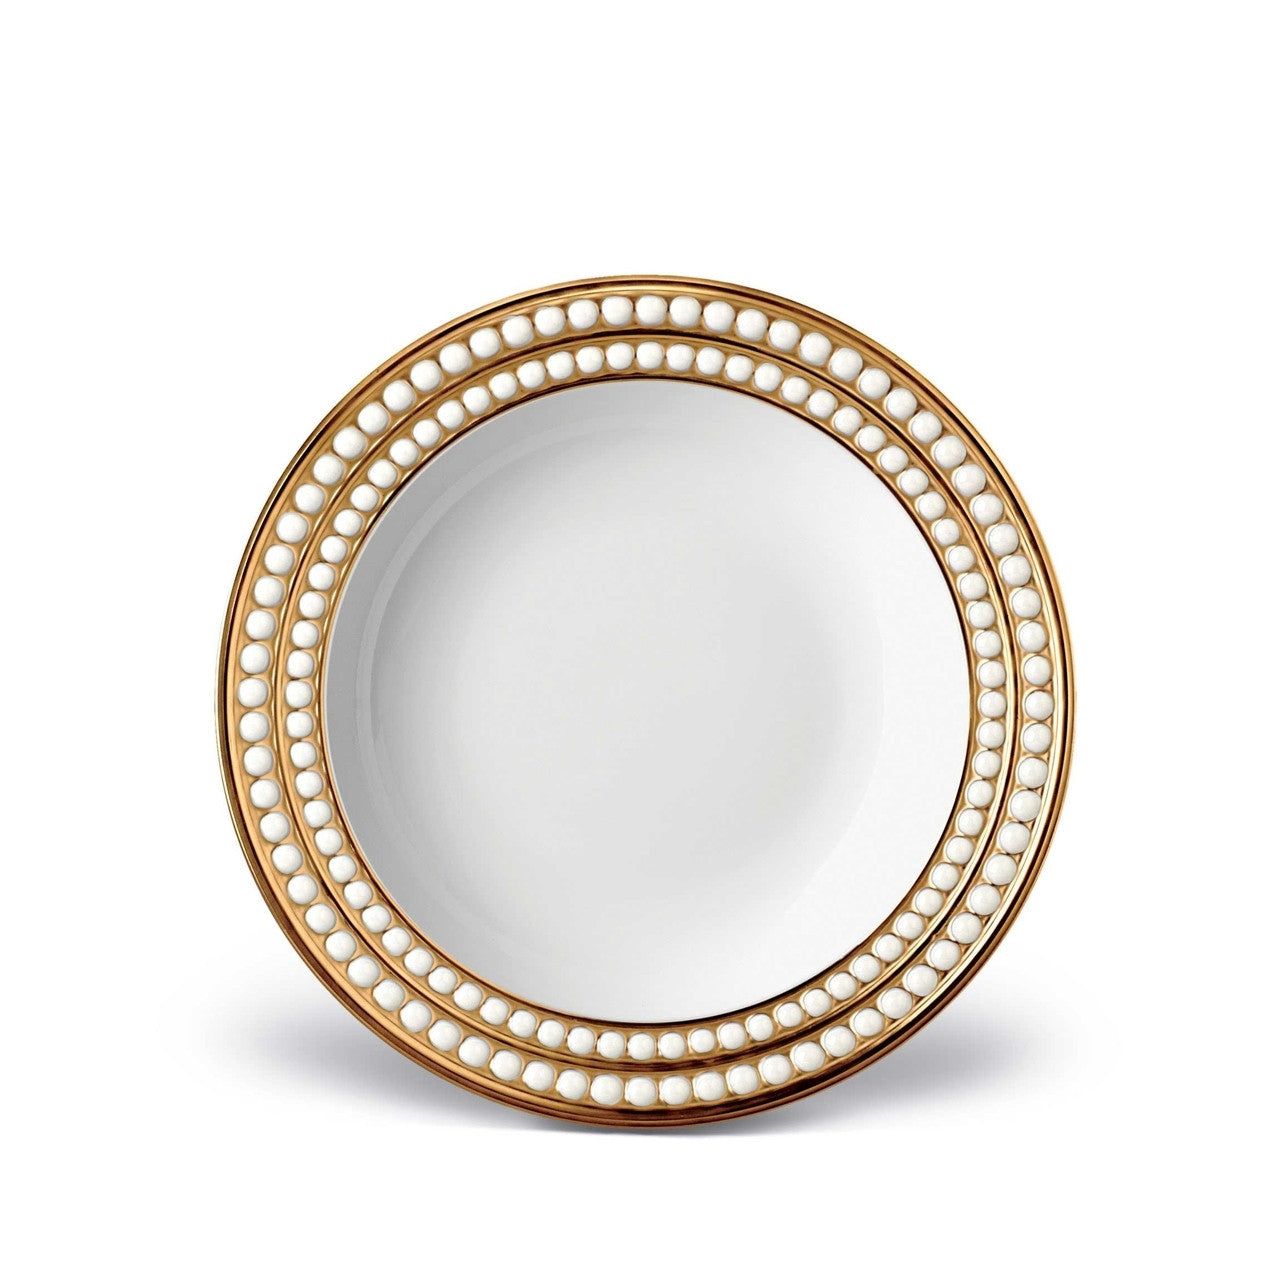 Perlee Gold Soup Plate - RSVP Style